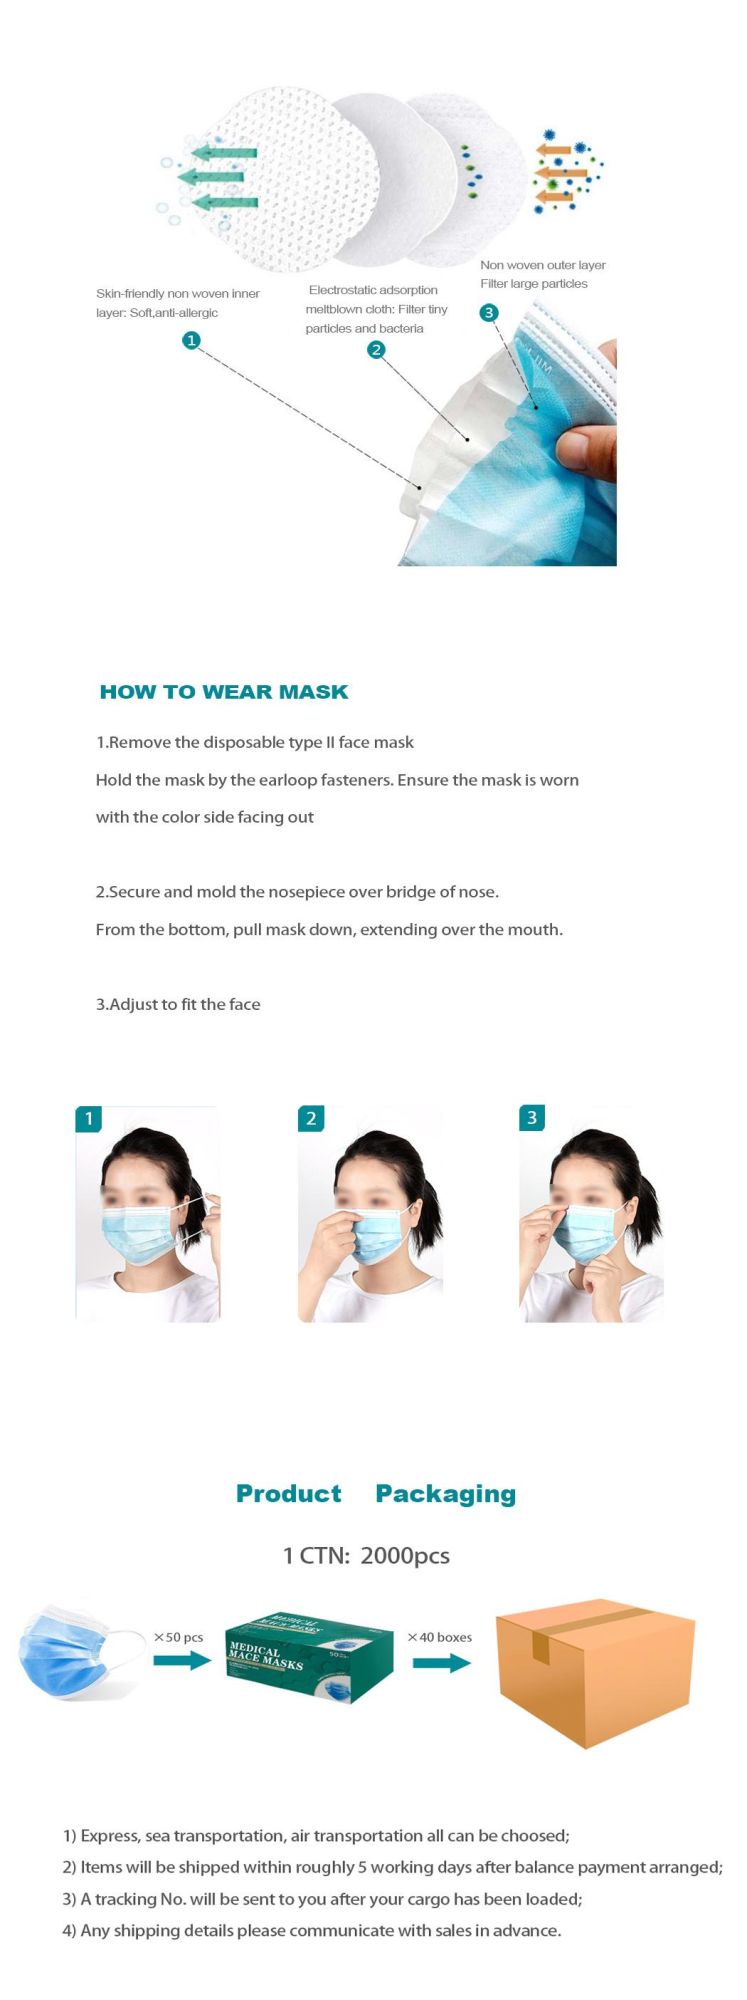 Anti-Fog Free of Pungent Smell Disposable 3 Ply Level 1/2/3 Mask